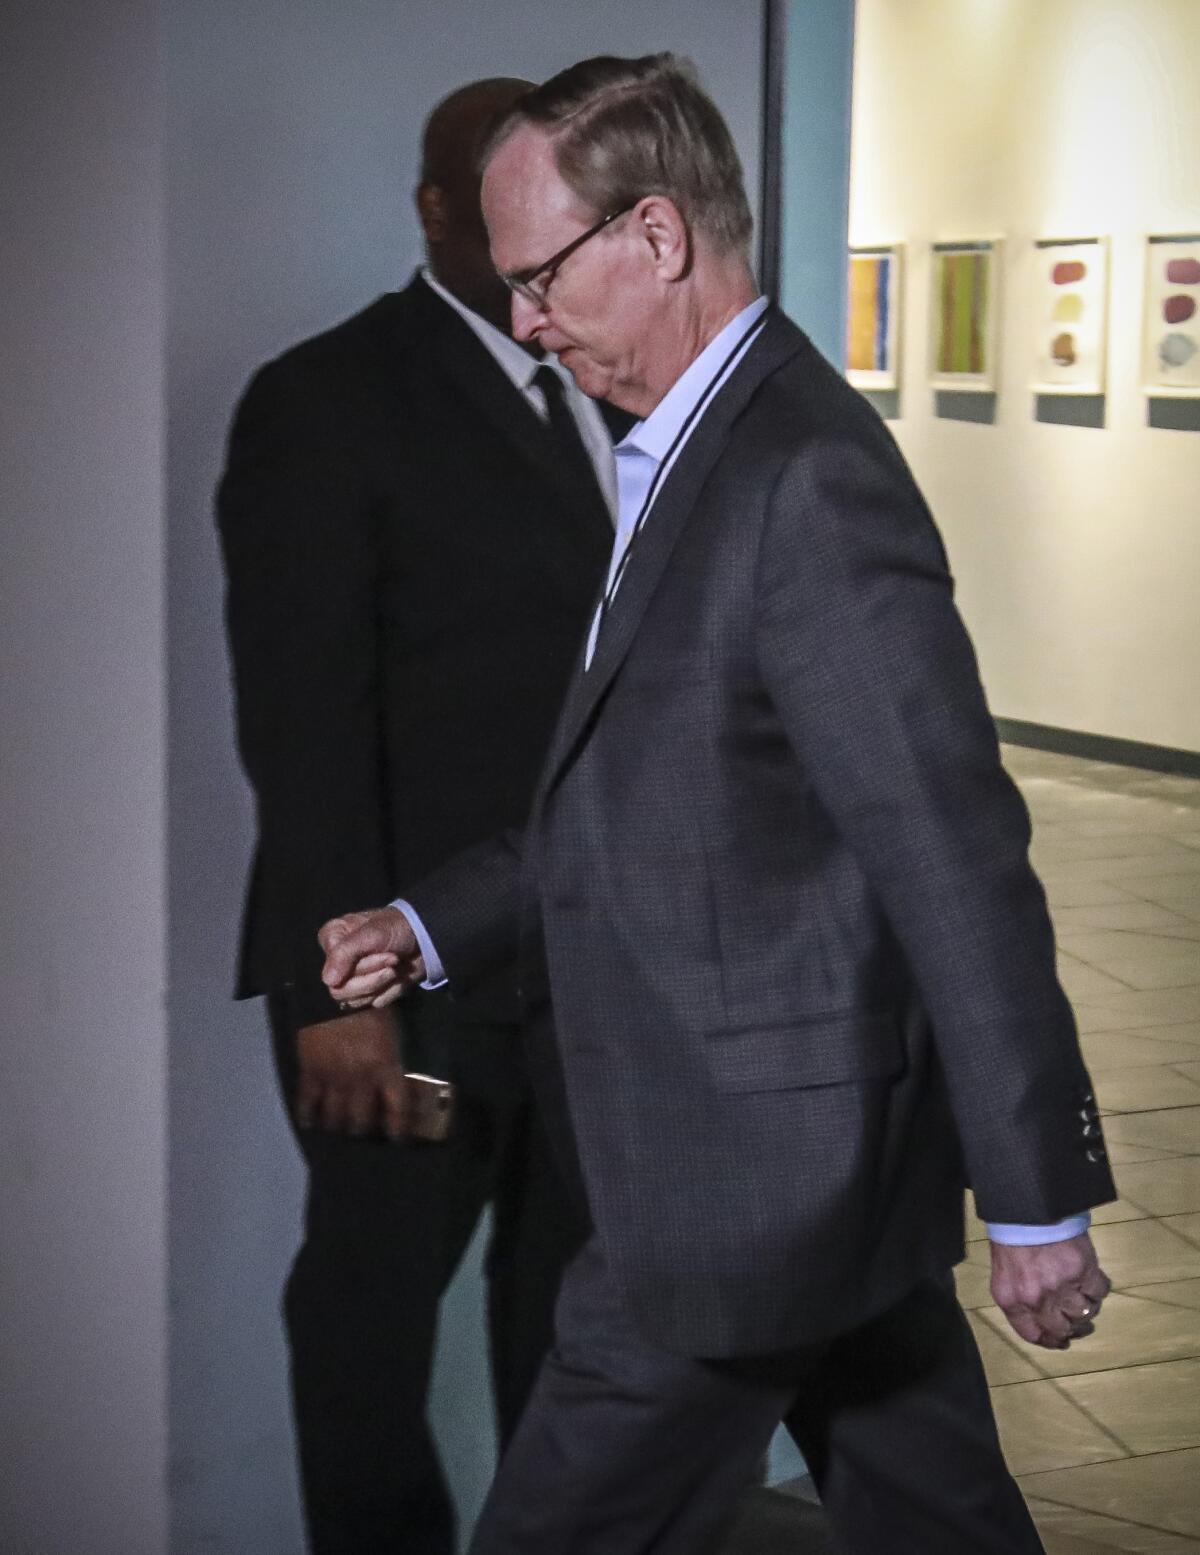 New York Giants owner John Mara arrives for a meeting with NFL owners to discuss a proposed labor agreement on Feb. 20.